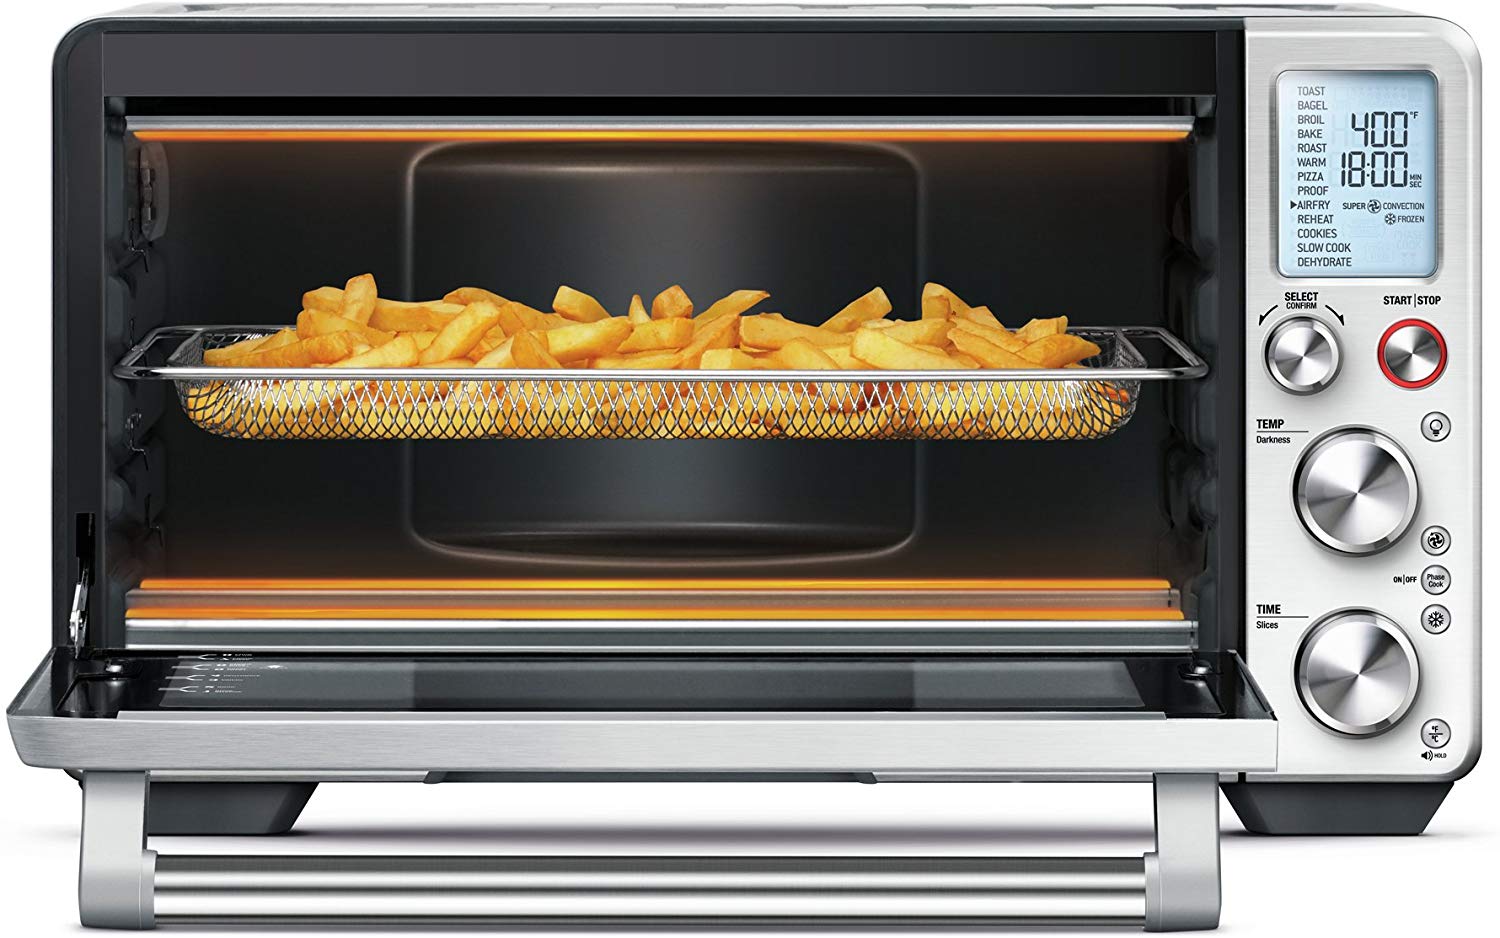 How To Air Fry French Fries In A Convection Oven